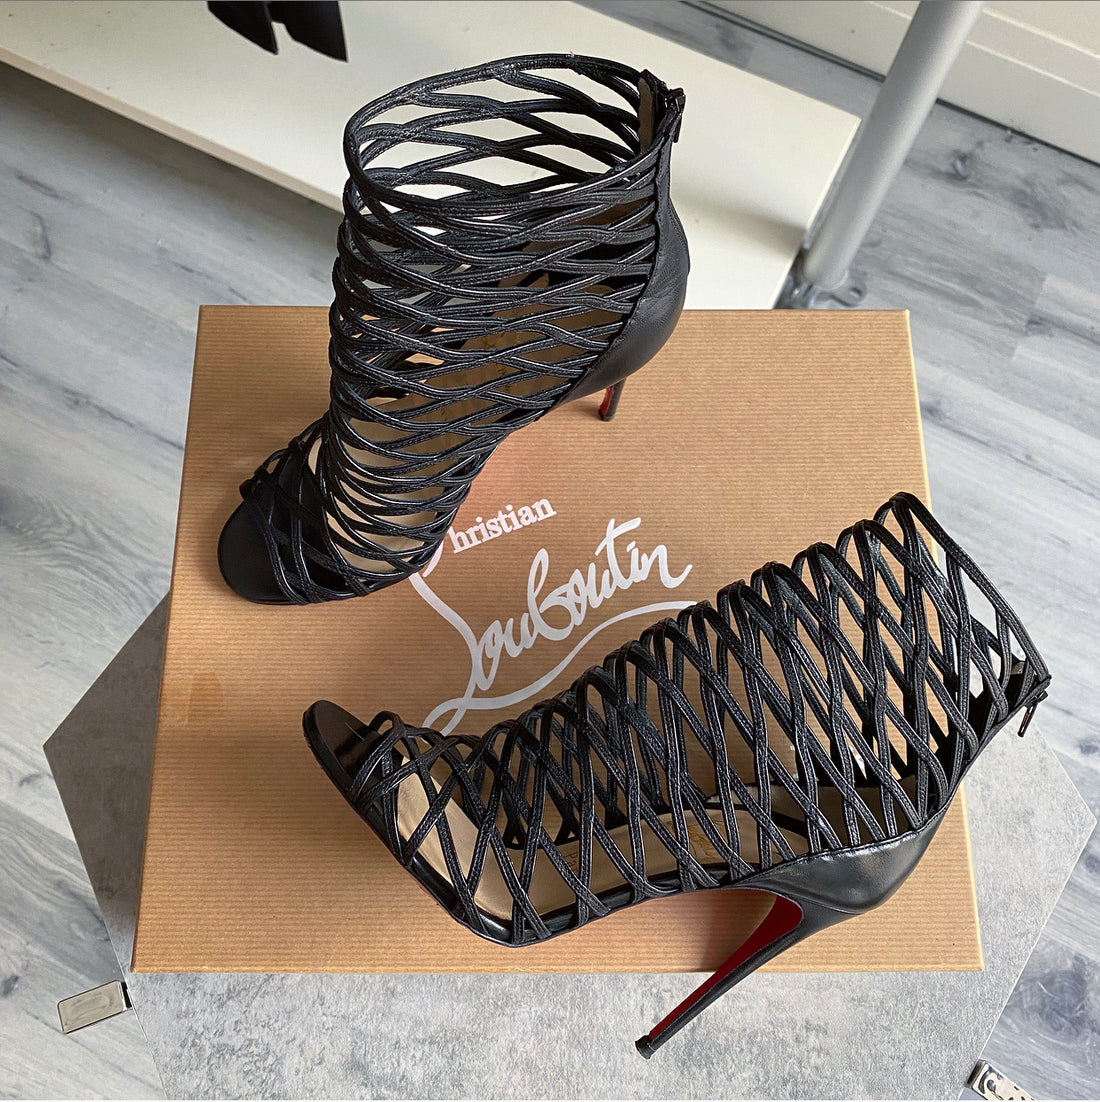 Louboutin Black Leather Millle Cinq 100 Caged Heels - 37